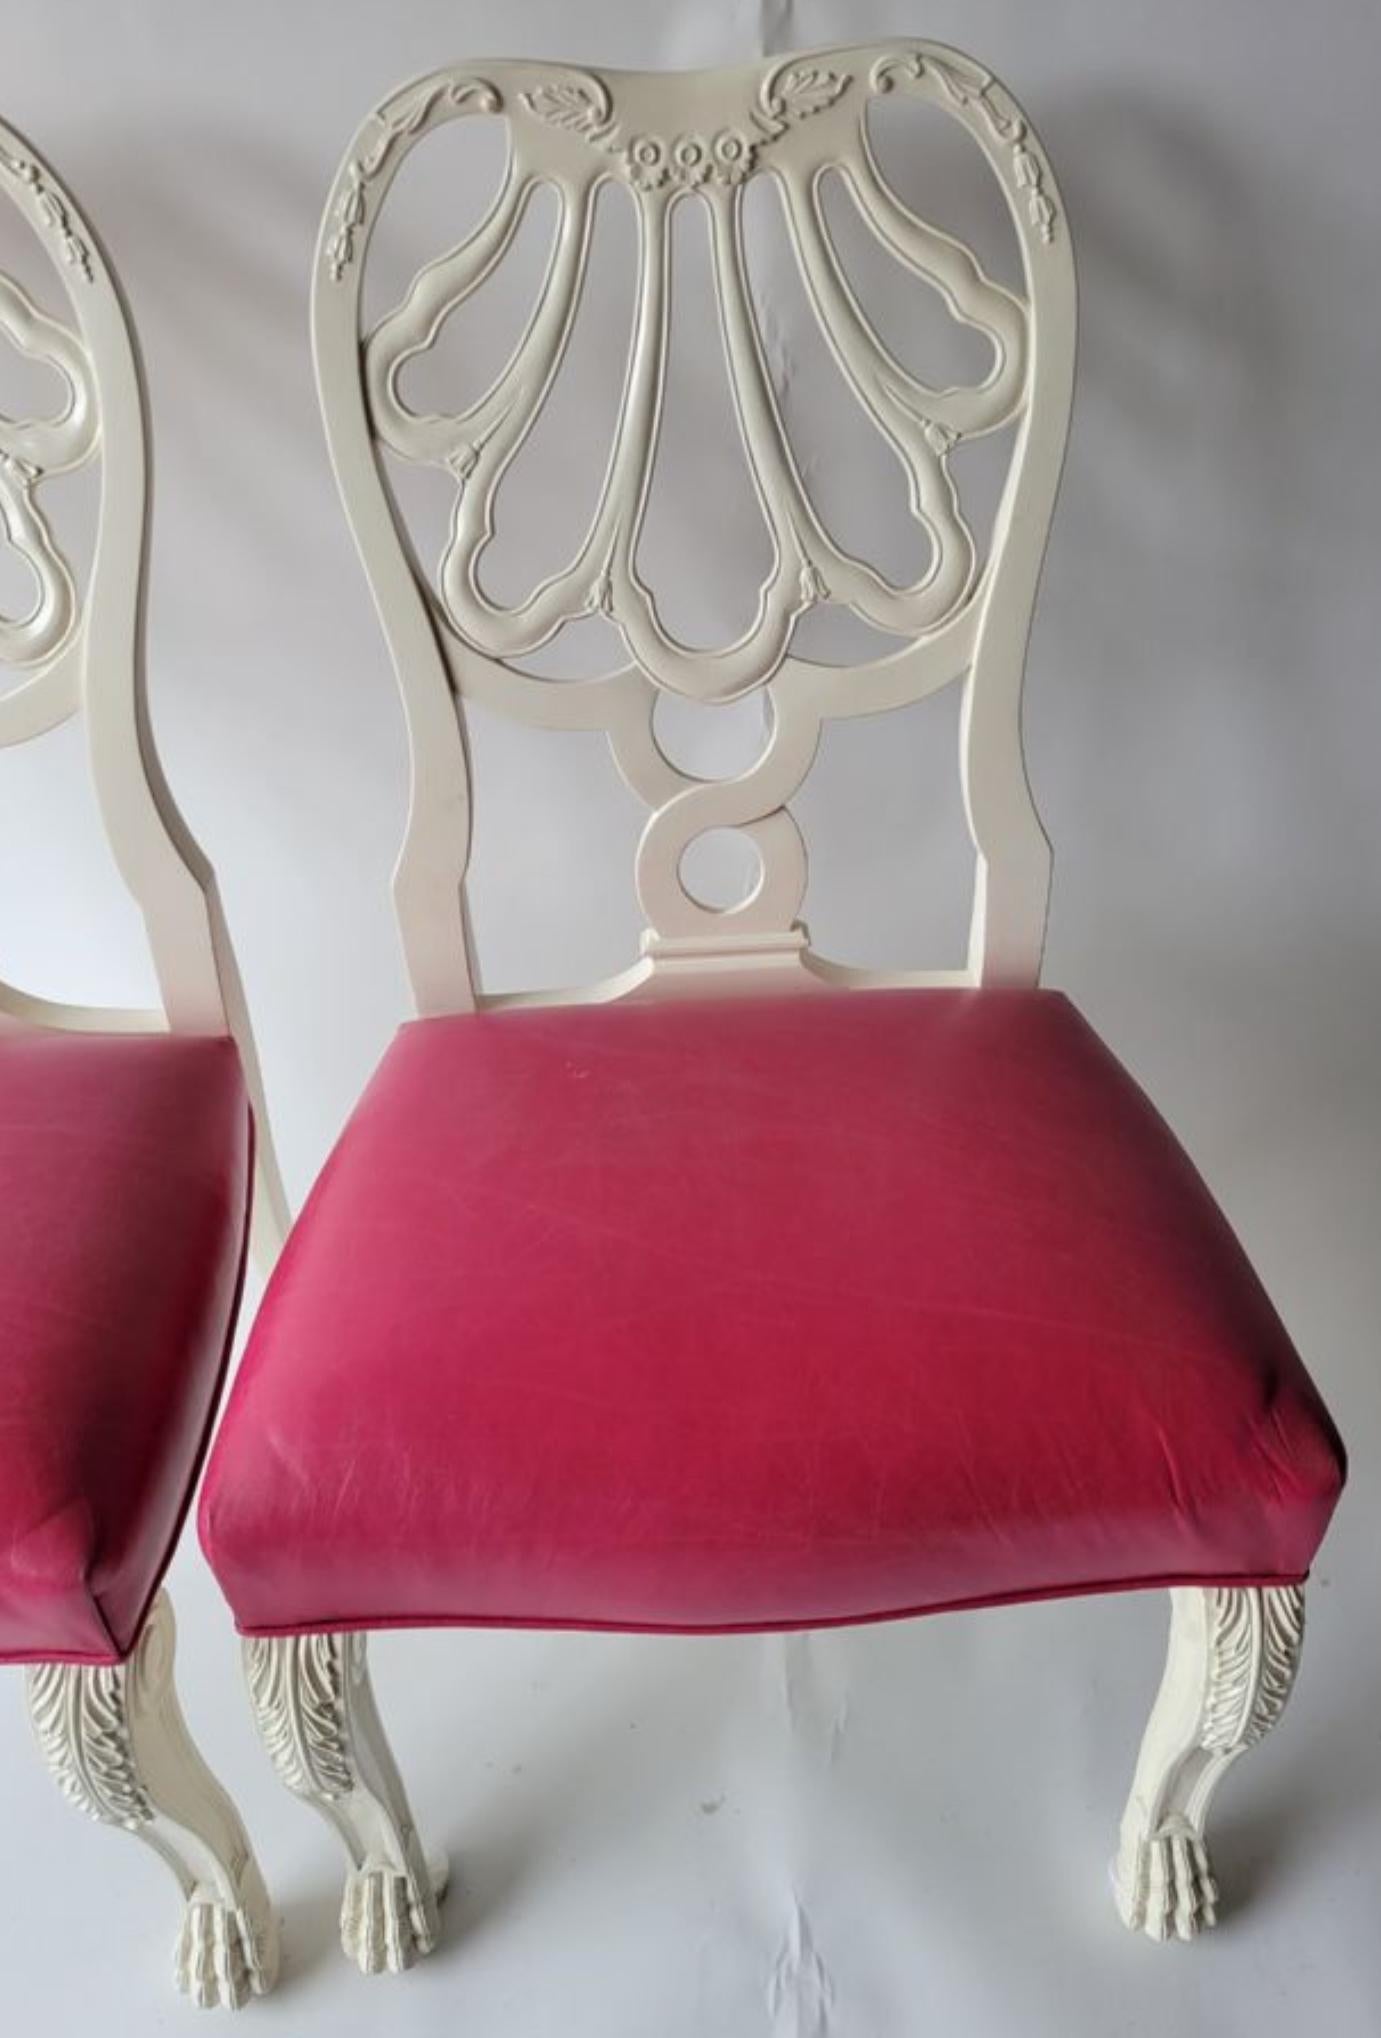 British Pair of Charlotte Moss Hollywood Regency White Lacquer & Pink Leather Chairs